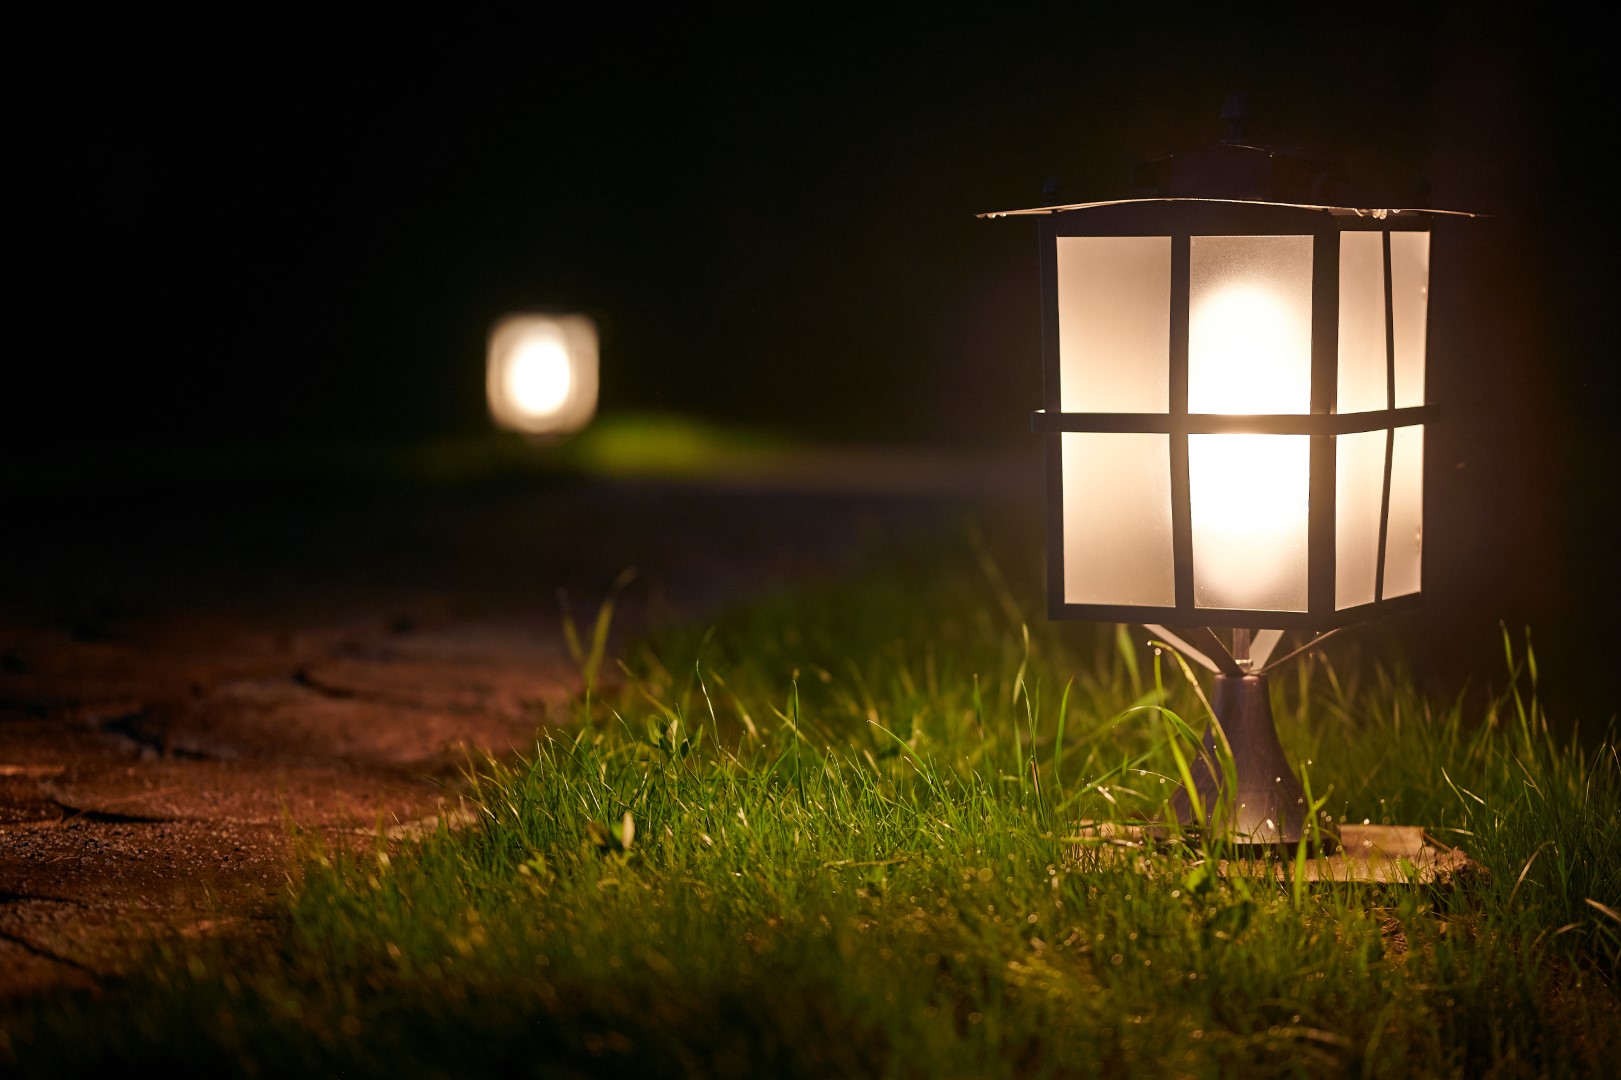 DIY Do It Yourself Landscape Lighting in Greenfield village, OH